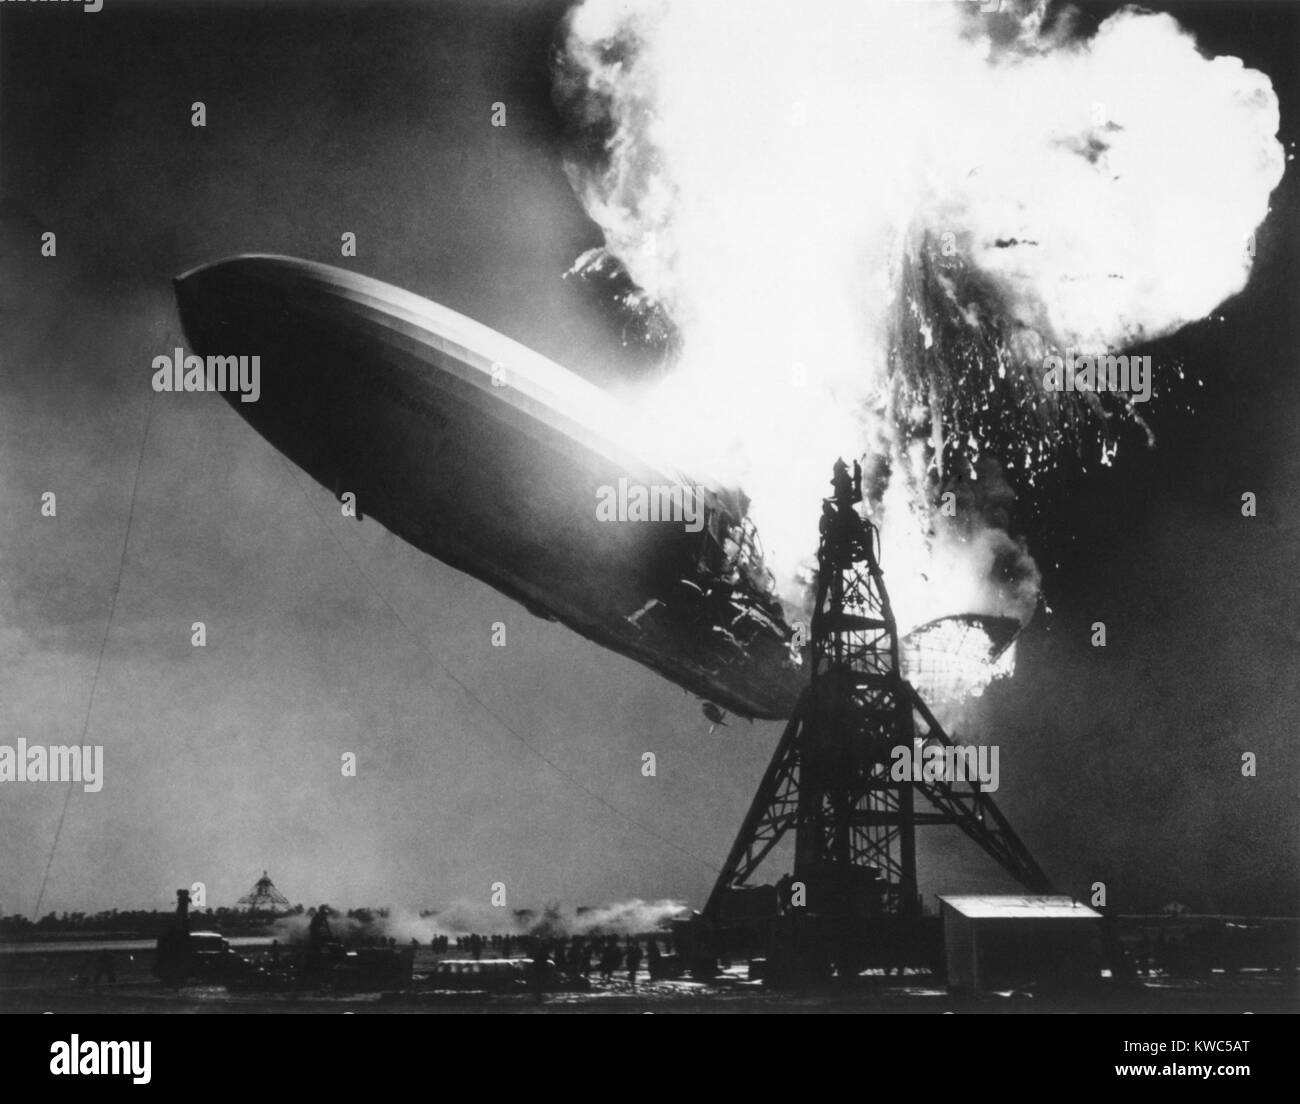 The German passenger airship Hindenburg seconds after catching fire, May 6, 1937. At 200 feet above the ground, flames erupt on top and in the back of the ship. It descended as it burned, reaching the ground as a metal skeleton after the fabric covering burned away in less than 30 seconds. (BSLOC 2015 14 188) Stock Photo